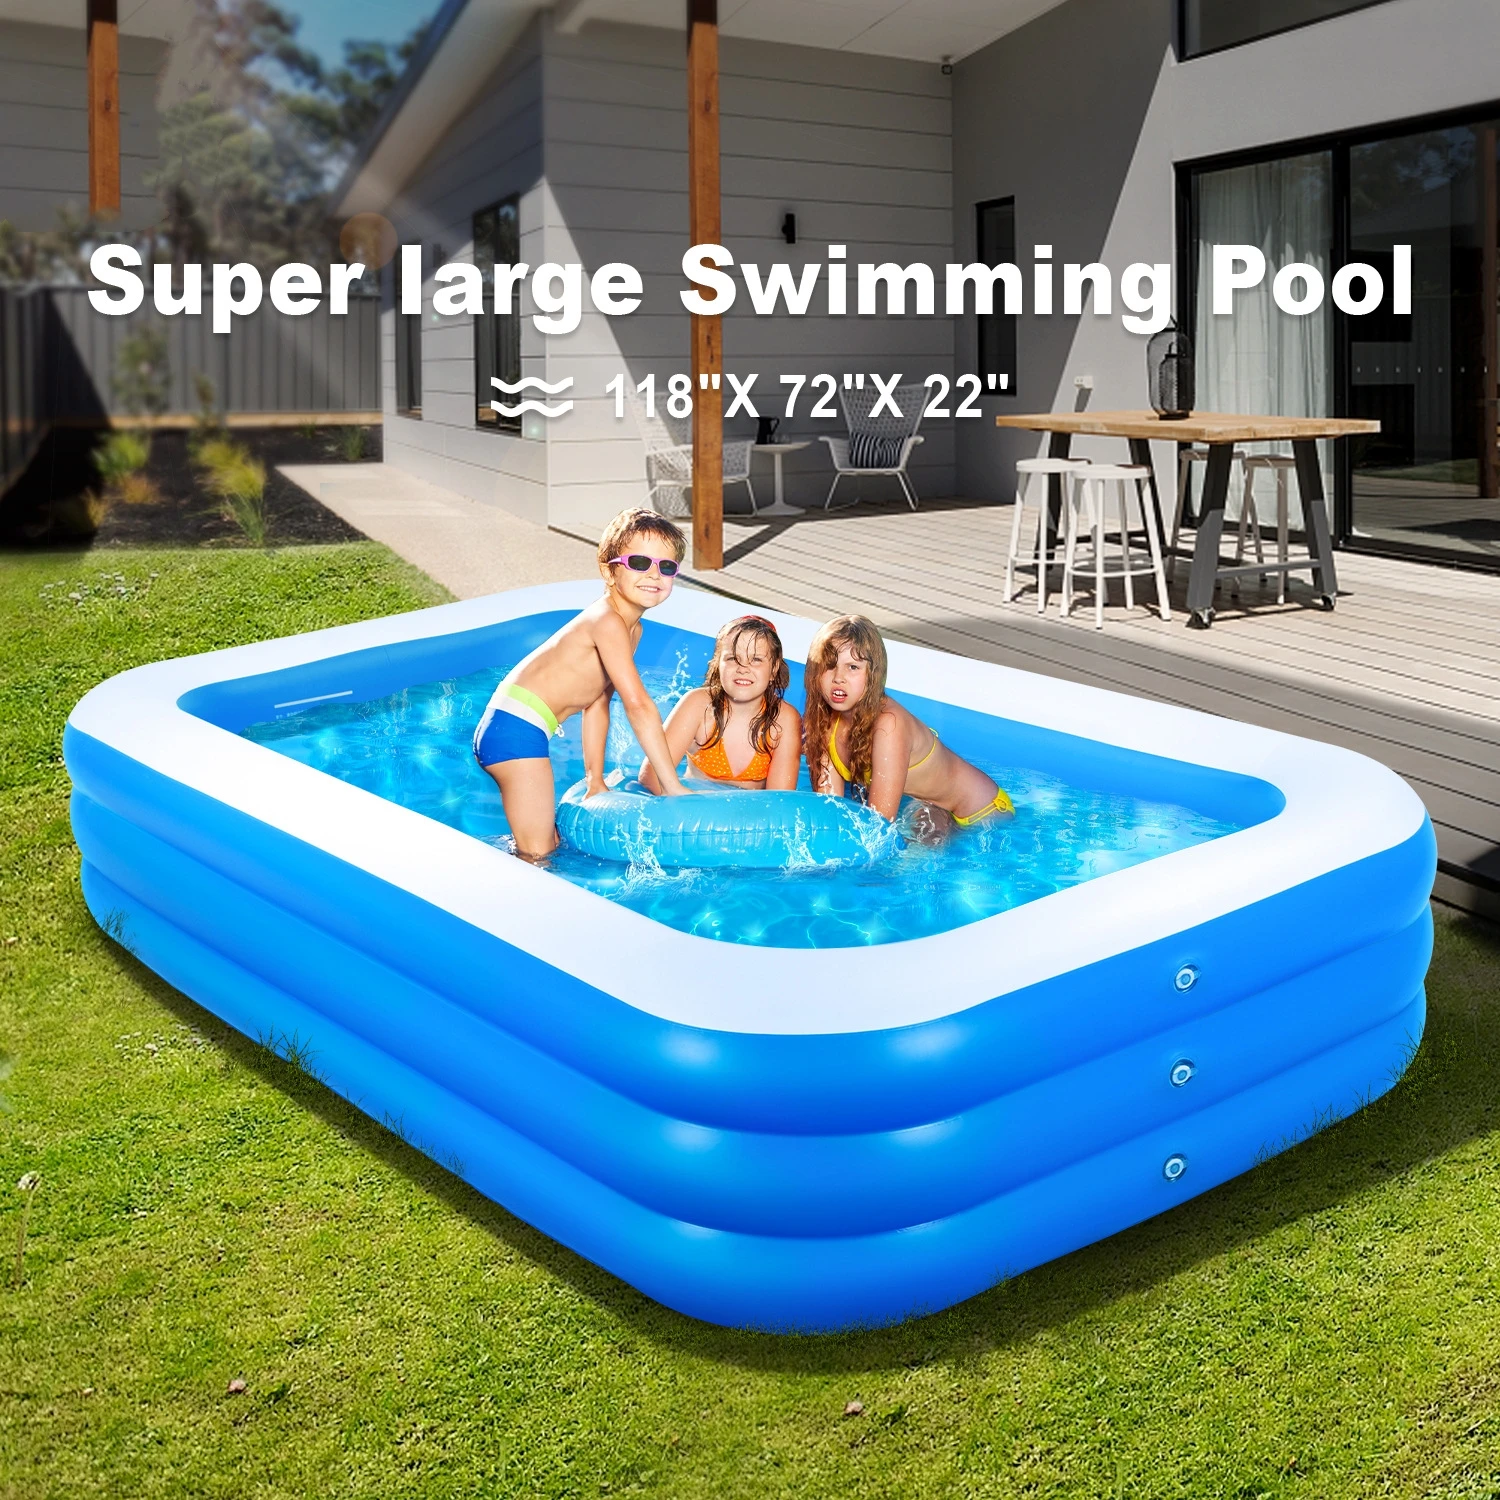 Inflatable Swimming Pool Children's Adult PVC Large Family Party Pools Outdoor Thickened Summer Baby Play Pool Toys Gift 1 4m folding inflatable adult bathtub thicken shower barrel large tub baby family bathroom spa tub for hot water bath